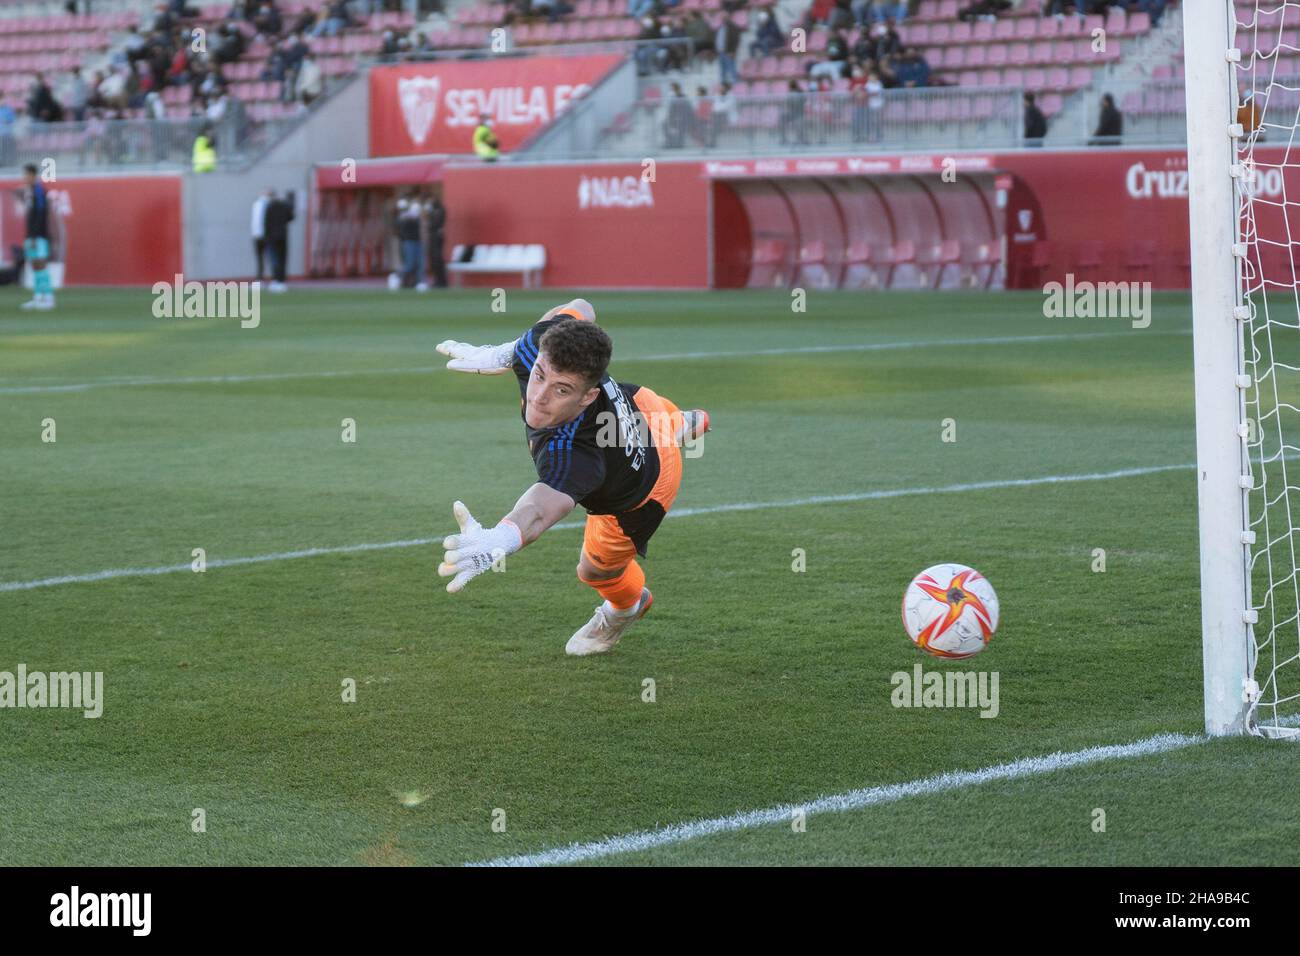 Luis López stopping a goal in the confrontation between Real Madrid Castilla and Sevilla Atlético on matchday 16 of the Primera Liga RFEF Group 2 in Seville, Spain. Credit: Alejandra Hidalgo/Alamy Live News Stock Photo